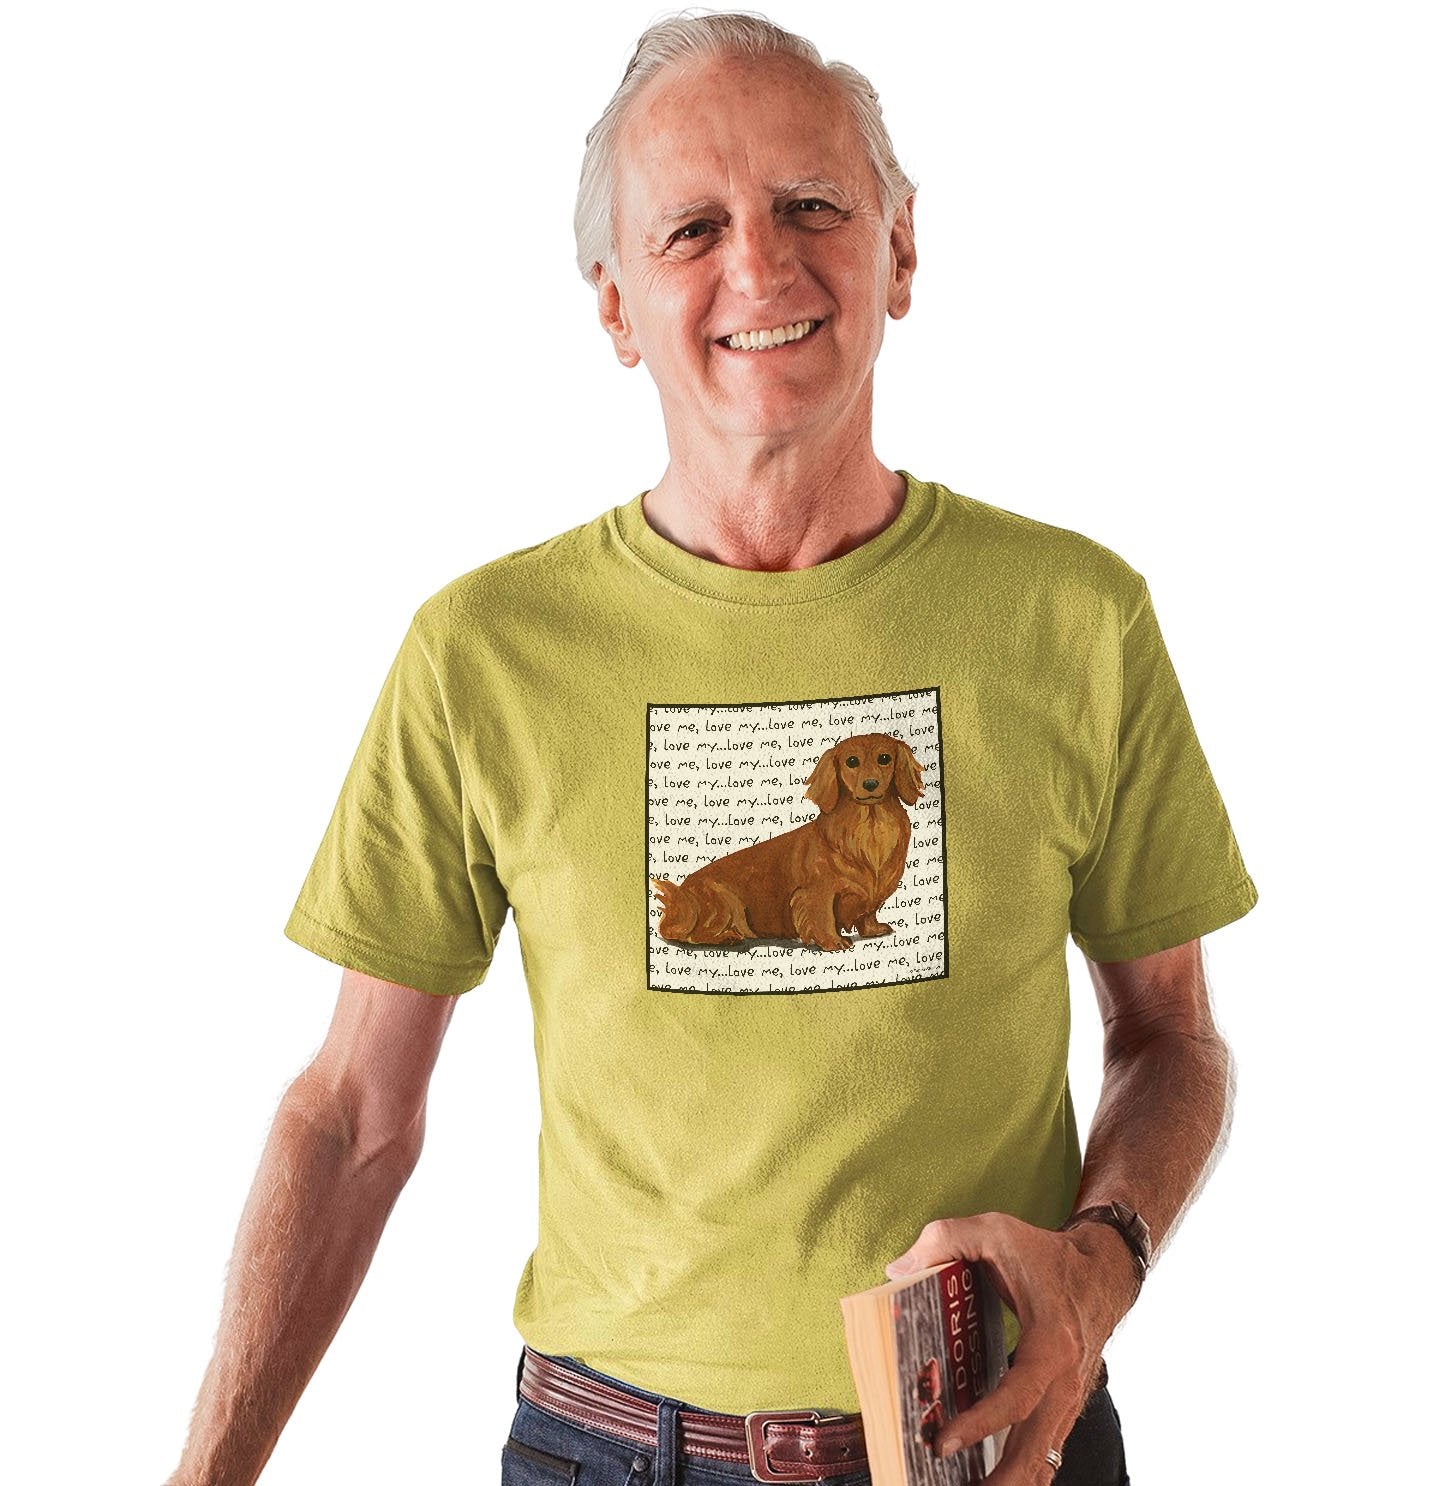 Animal Pride - Long Haired Dachshund Love Text - Adult Unisex T-Shirt